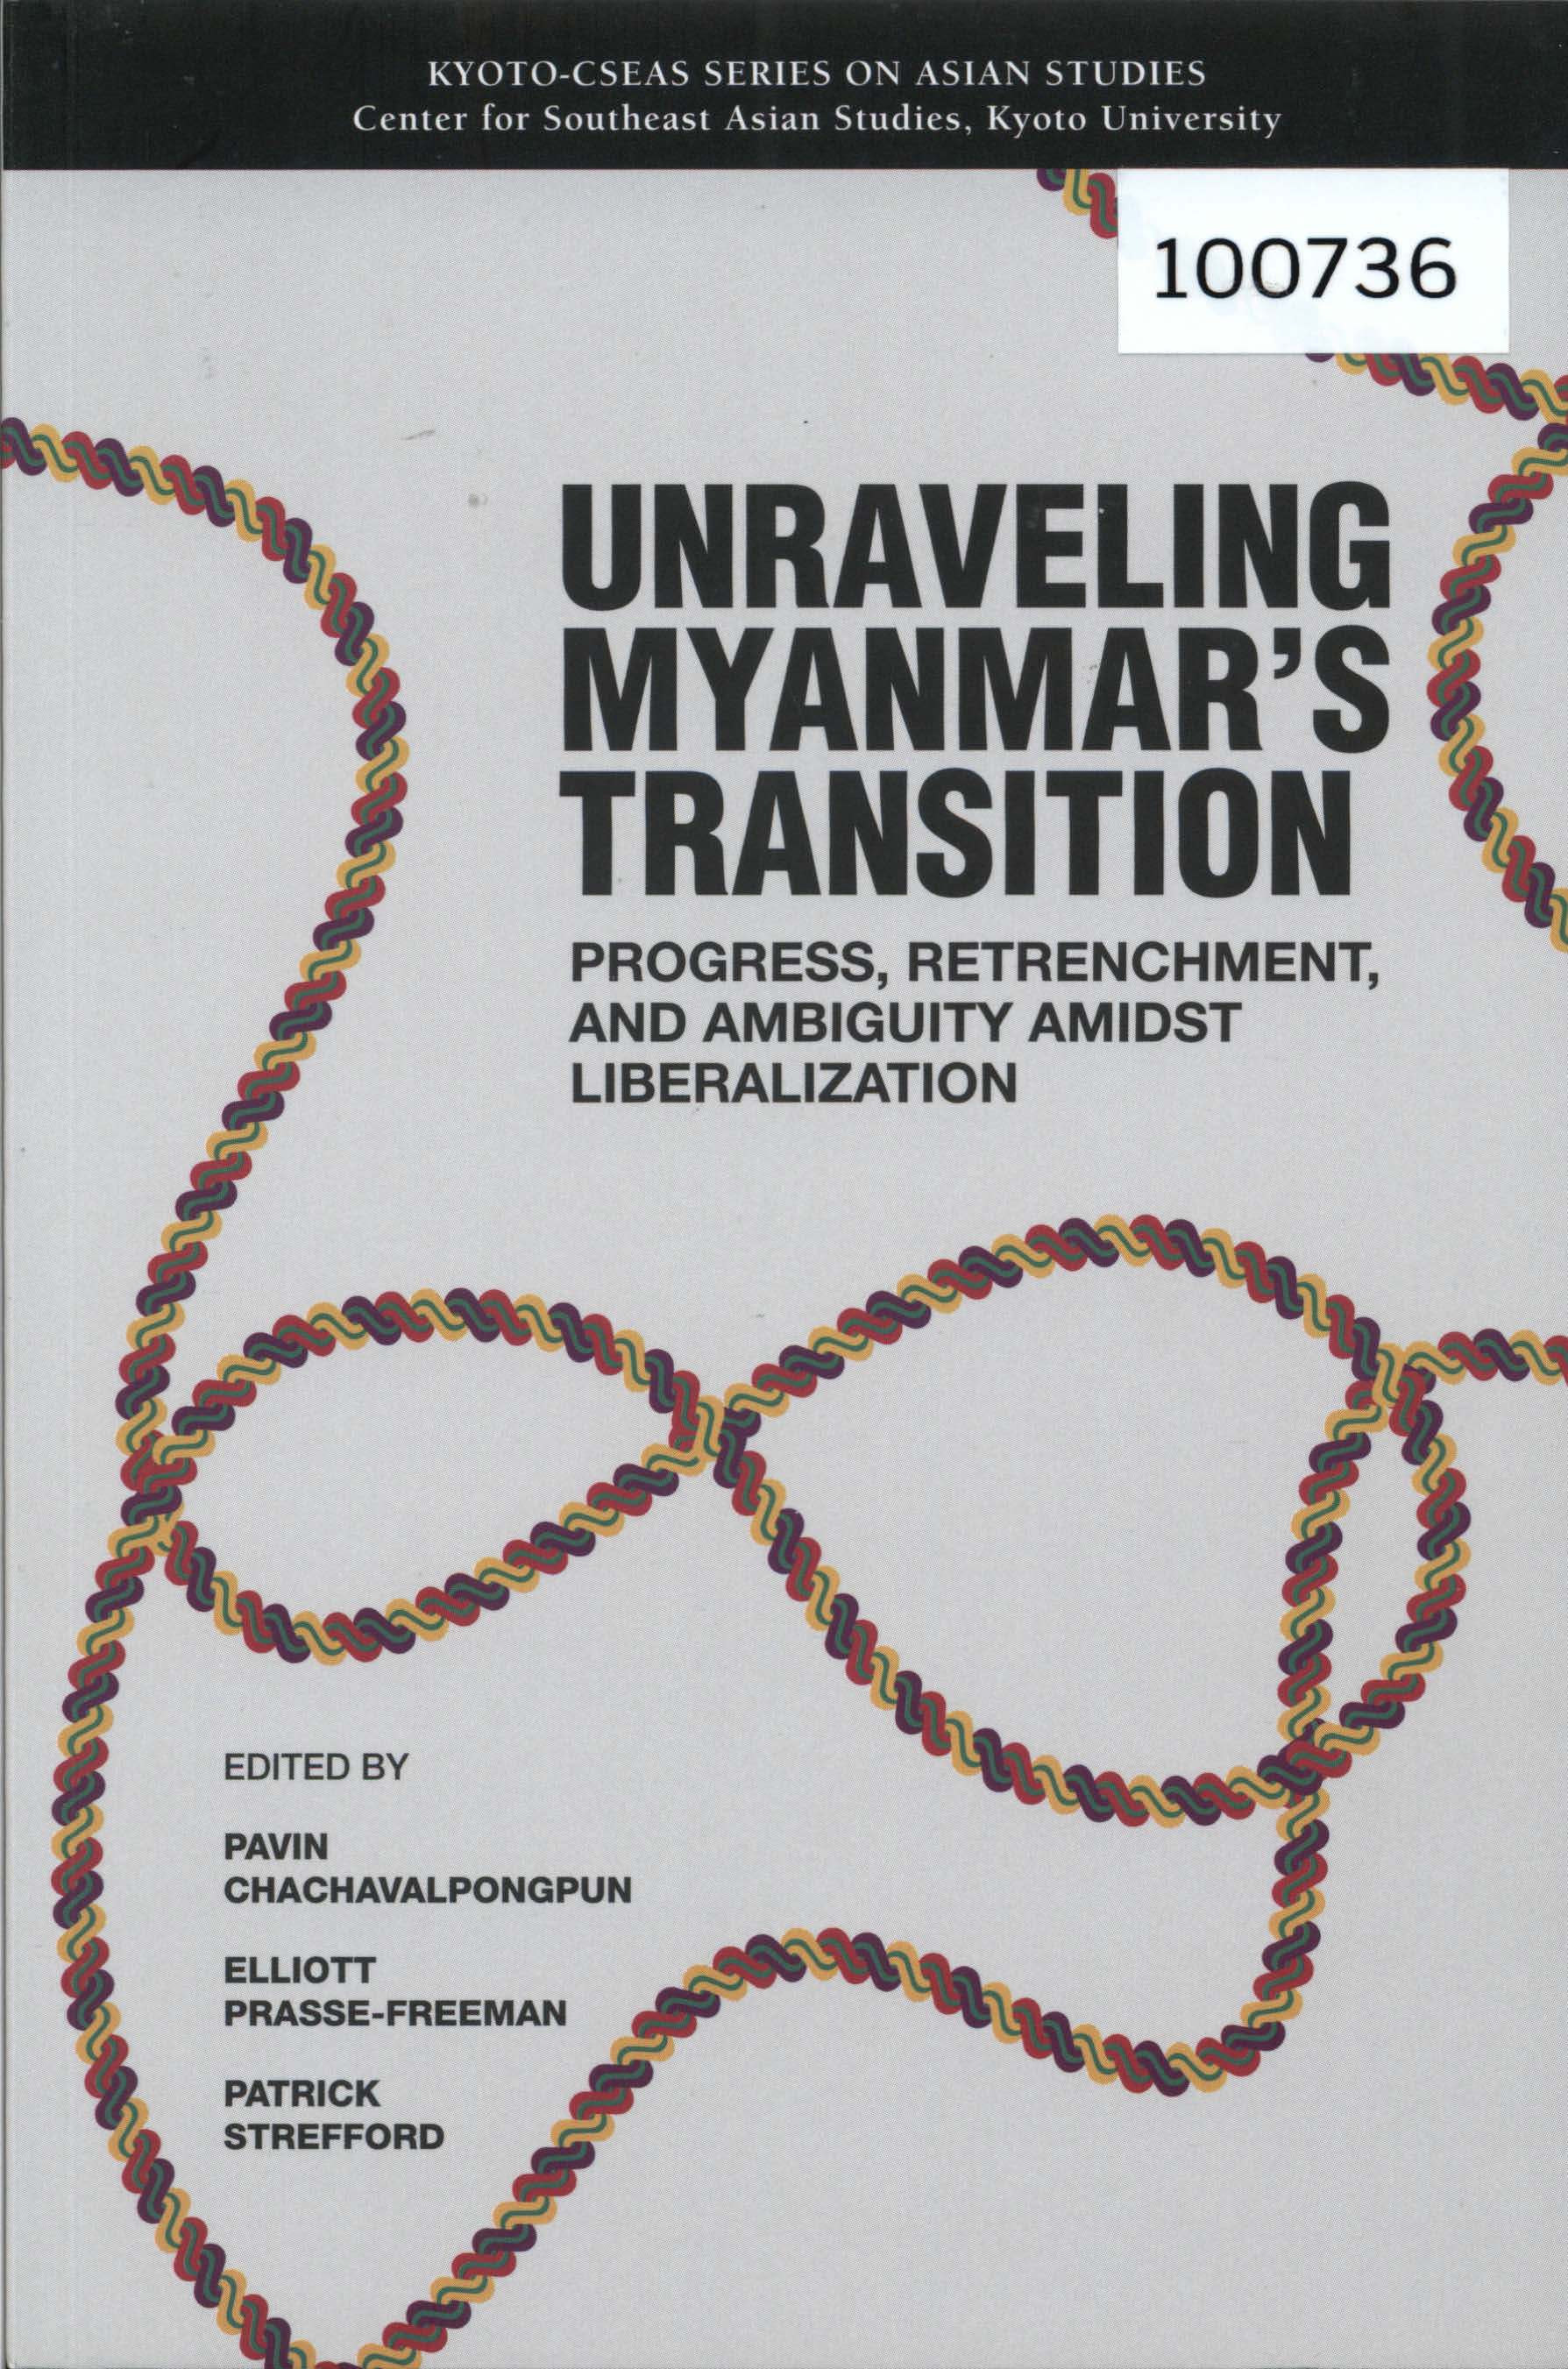 Unraveling Myanmar’s Transition: Progress, Retrenchment, and Ambiguity Amidst Liberalization